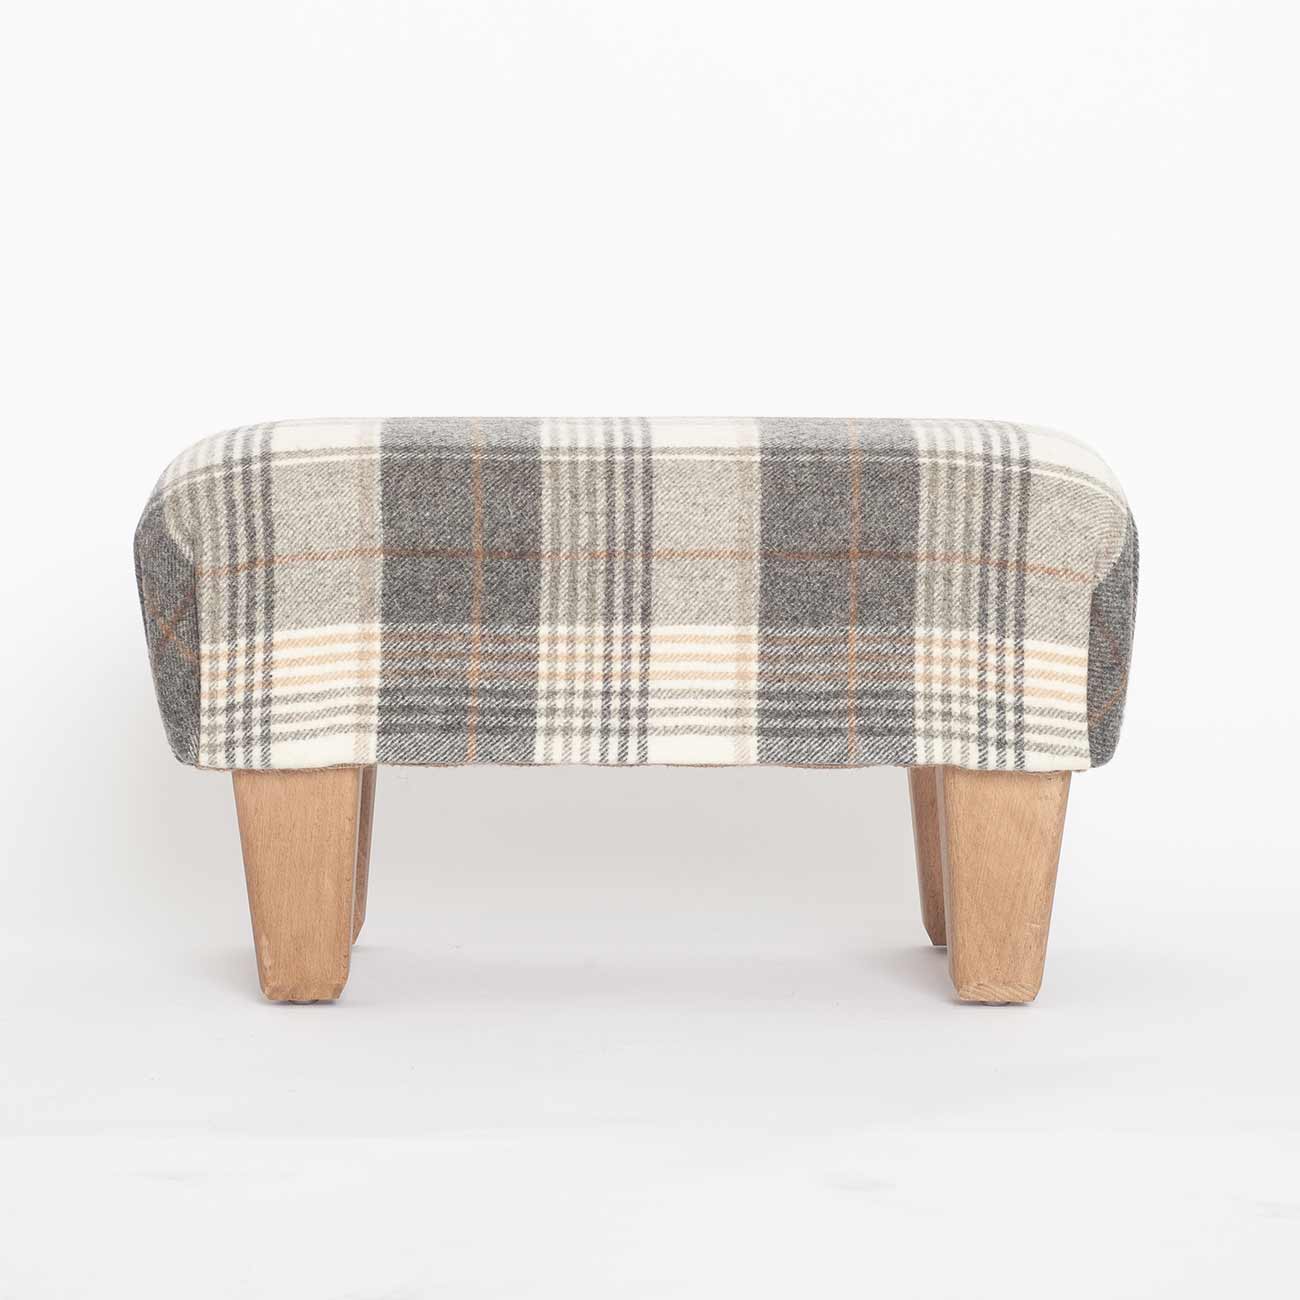 grey-stripes-footstool5 fabric from JLP